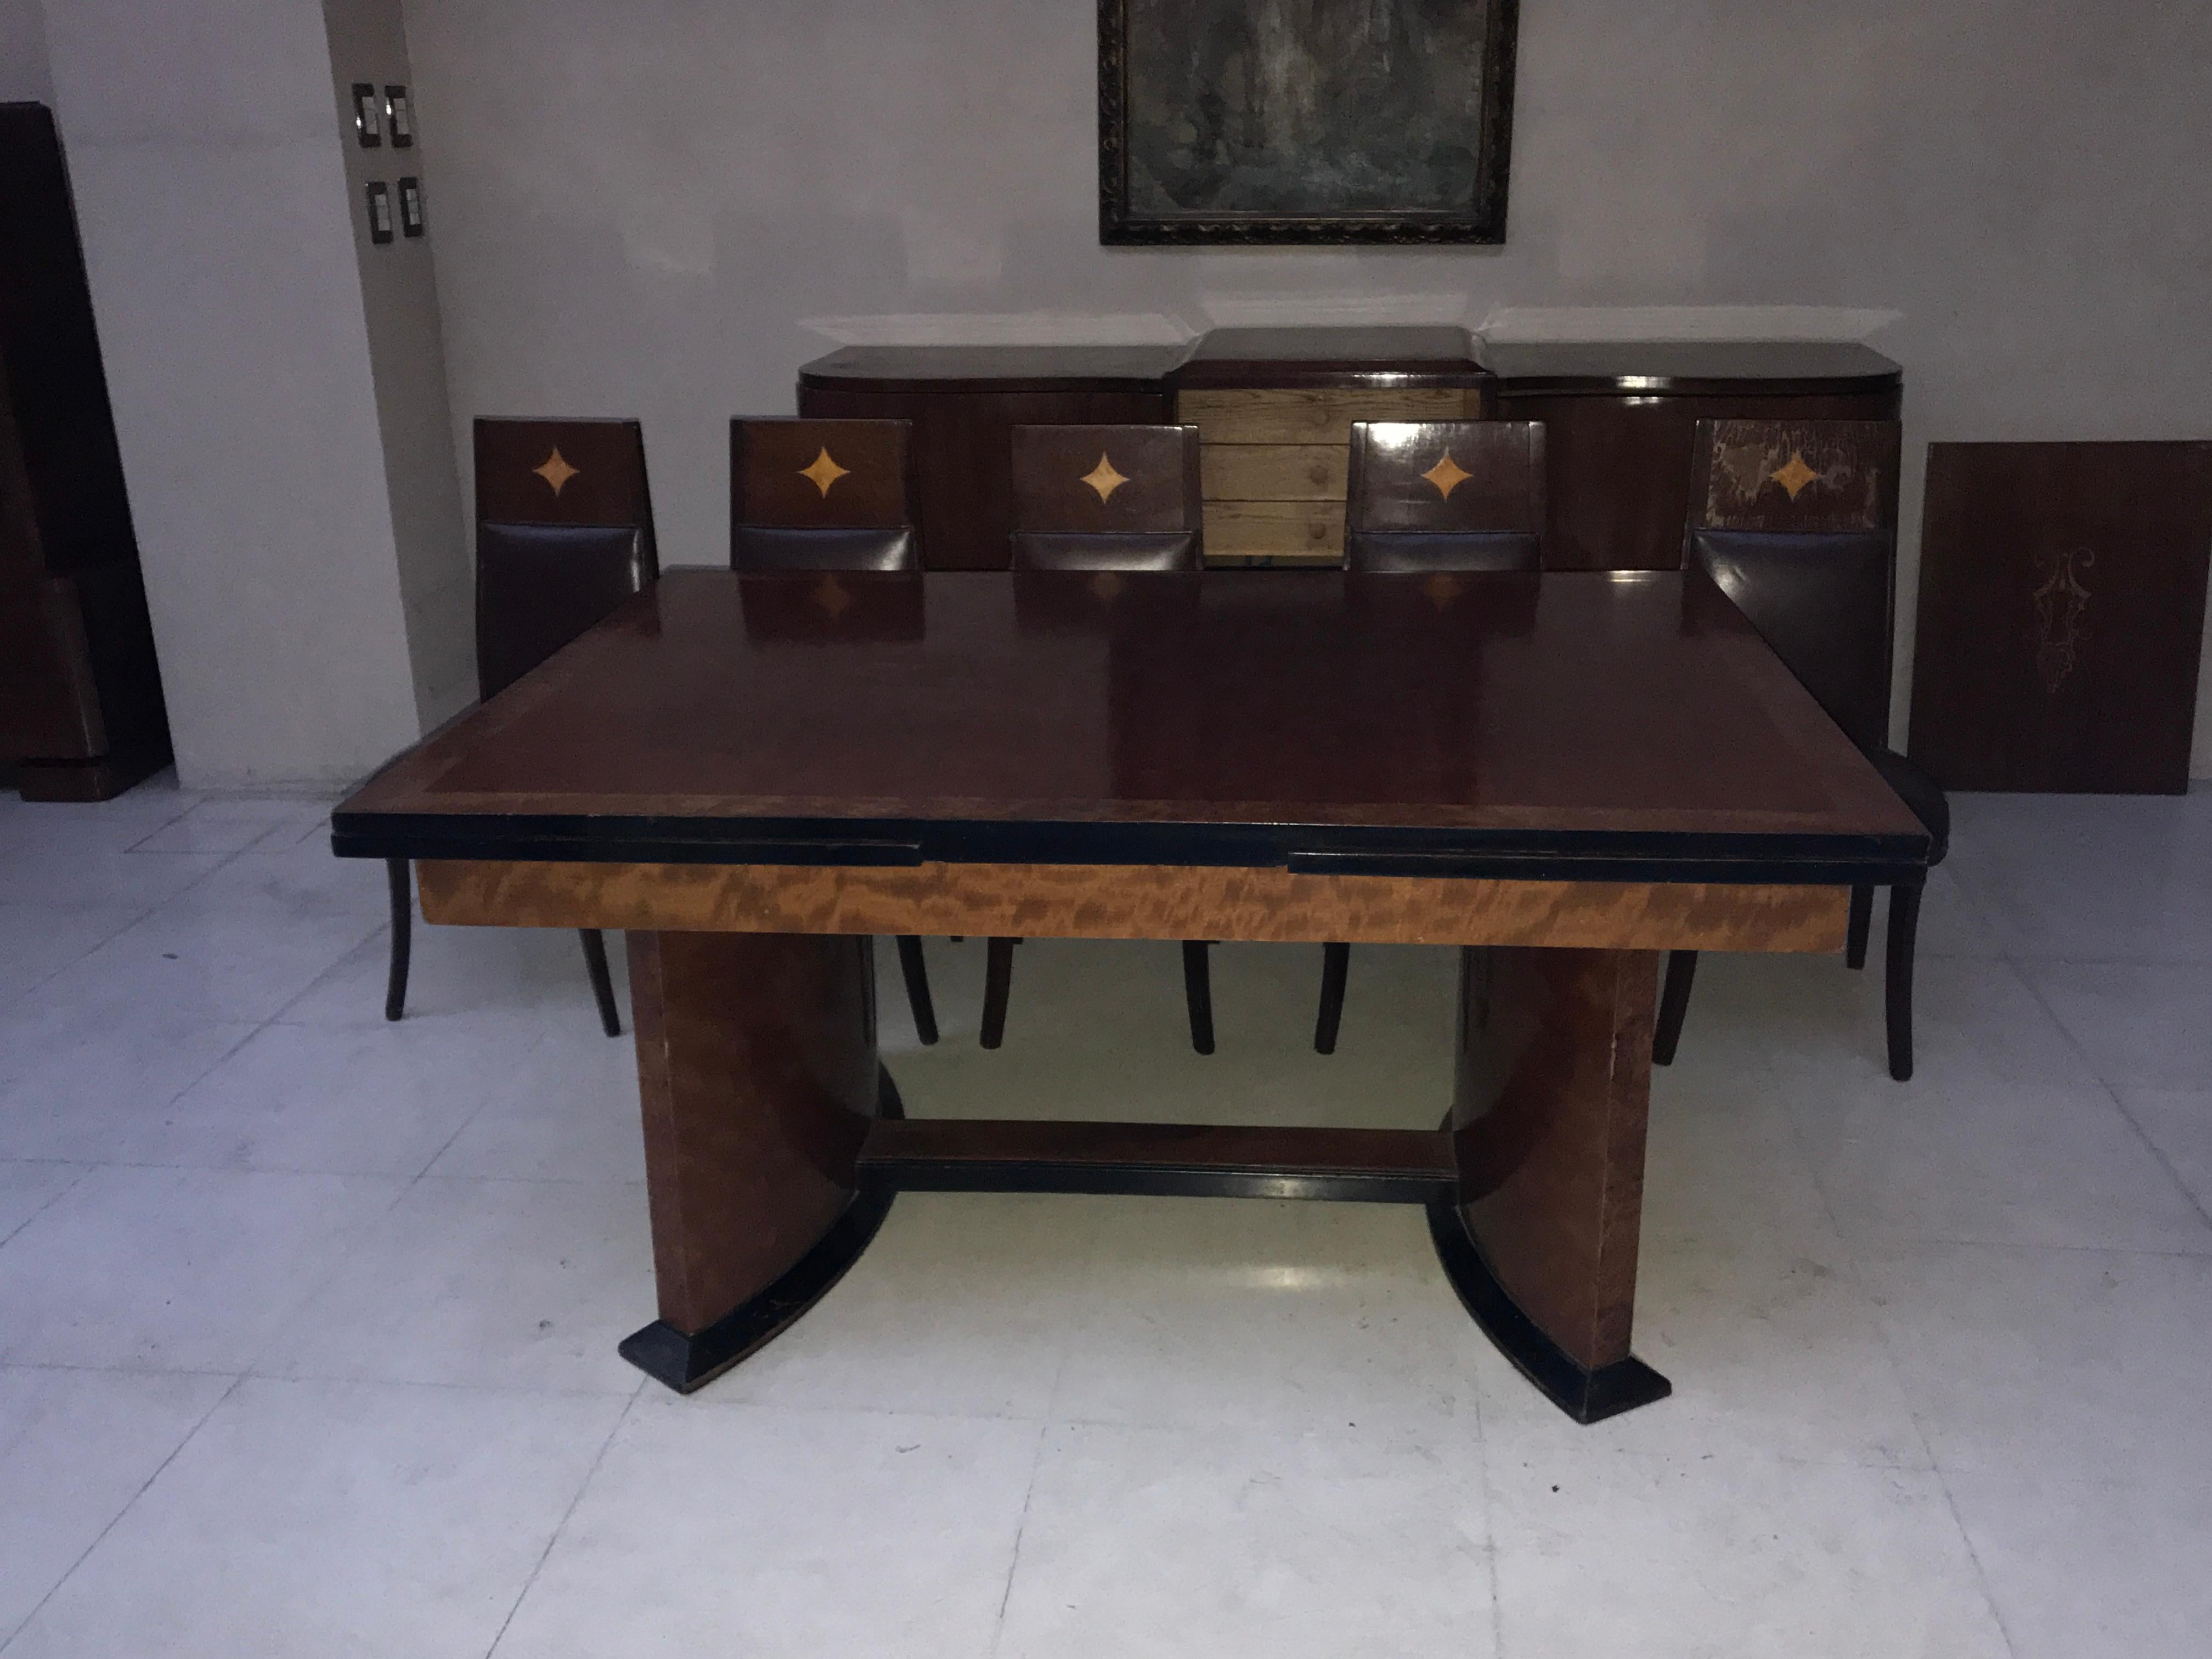 Dining table Art Deco with two extension boards

It is re-polished before delivery
Year: 1920
Country: French
Wood 
It is an elegant and sophisticated dining table.
You want to live in the golden years, this is the dining table that your project